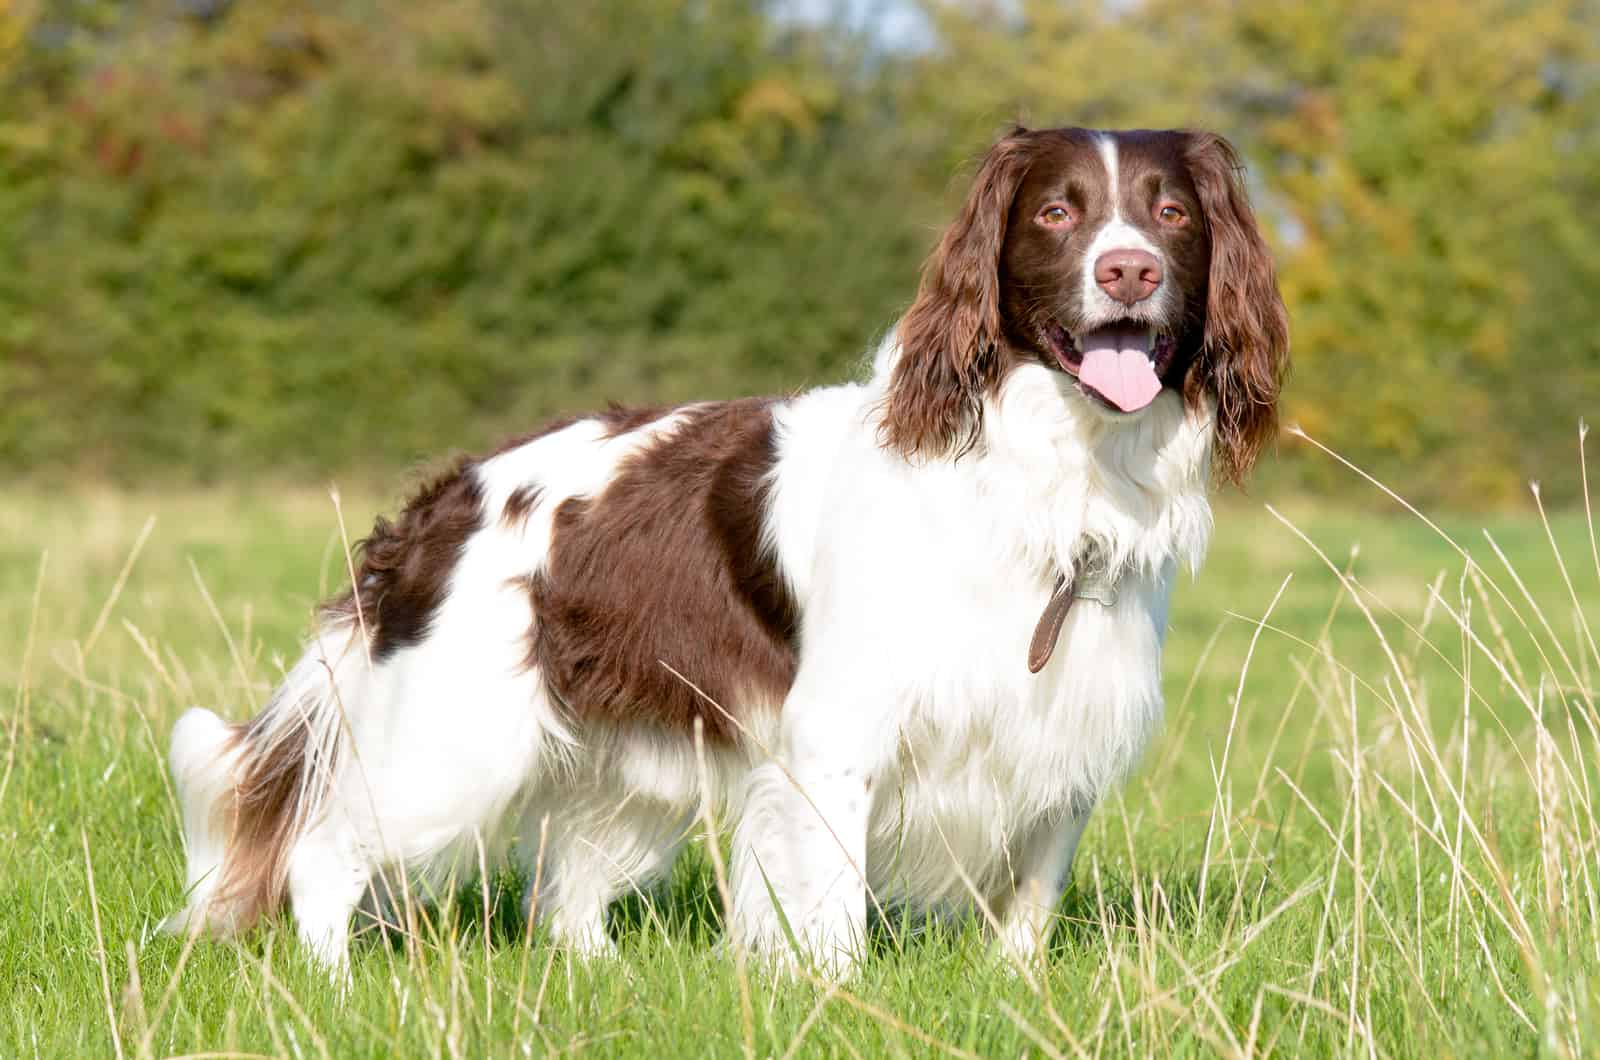 English Springer Spaniels stands on the grass and looks at the camera